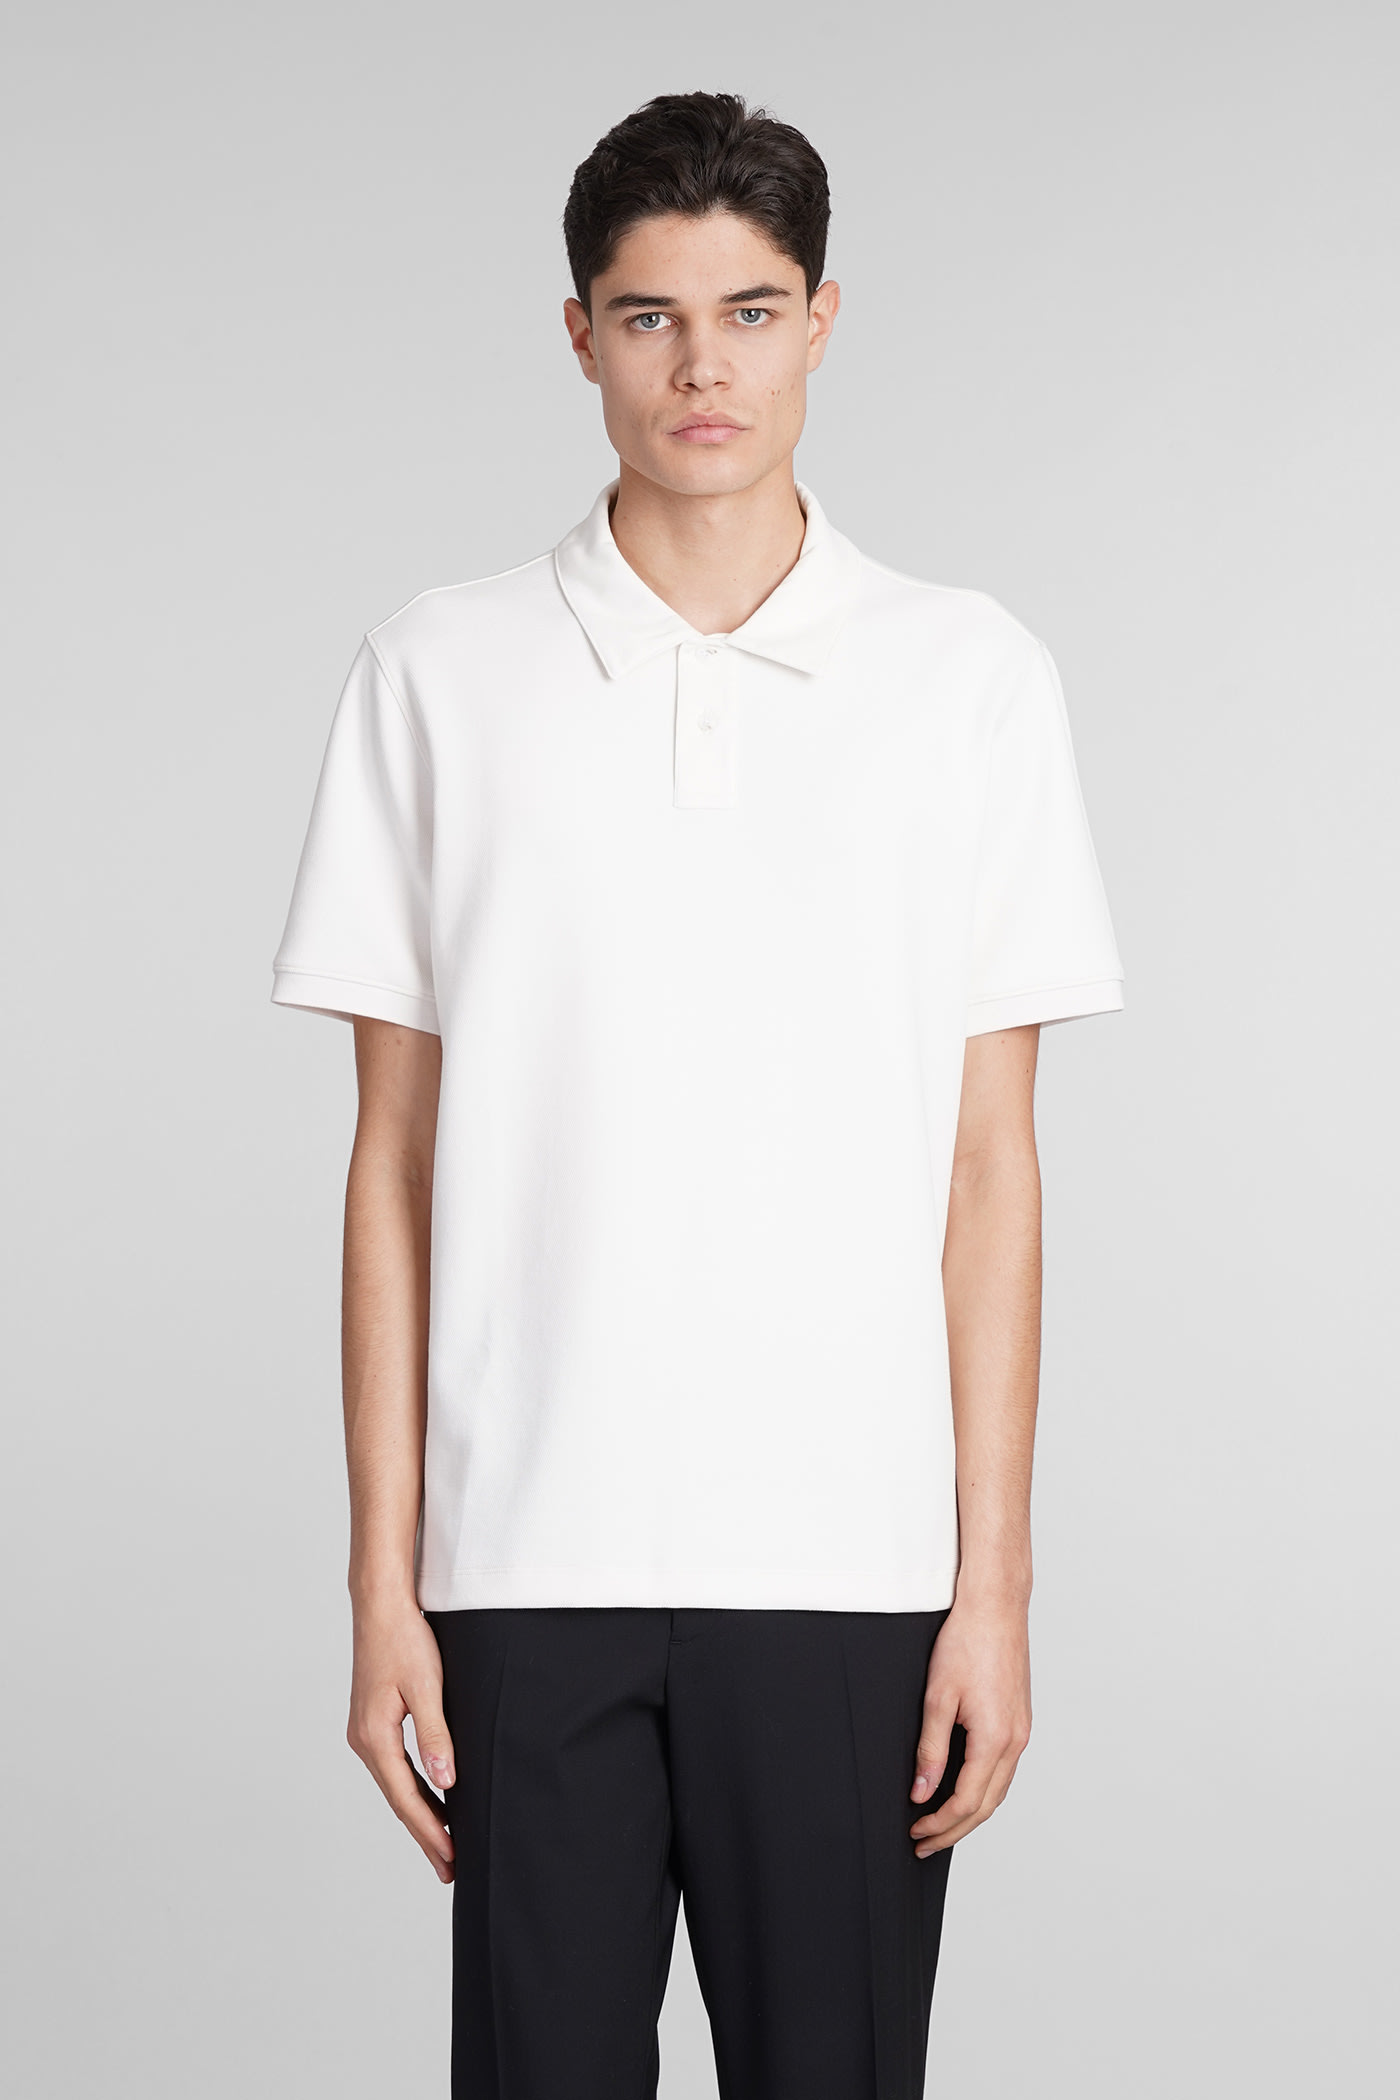 THEORY POLO IN BEIGE COTTON